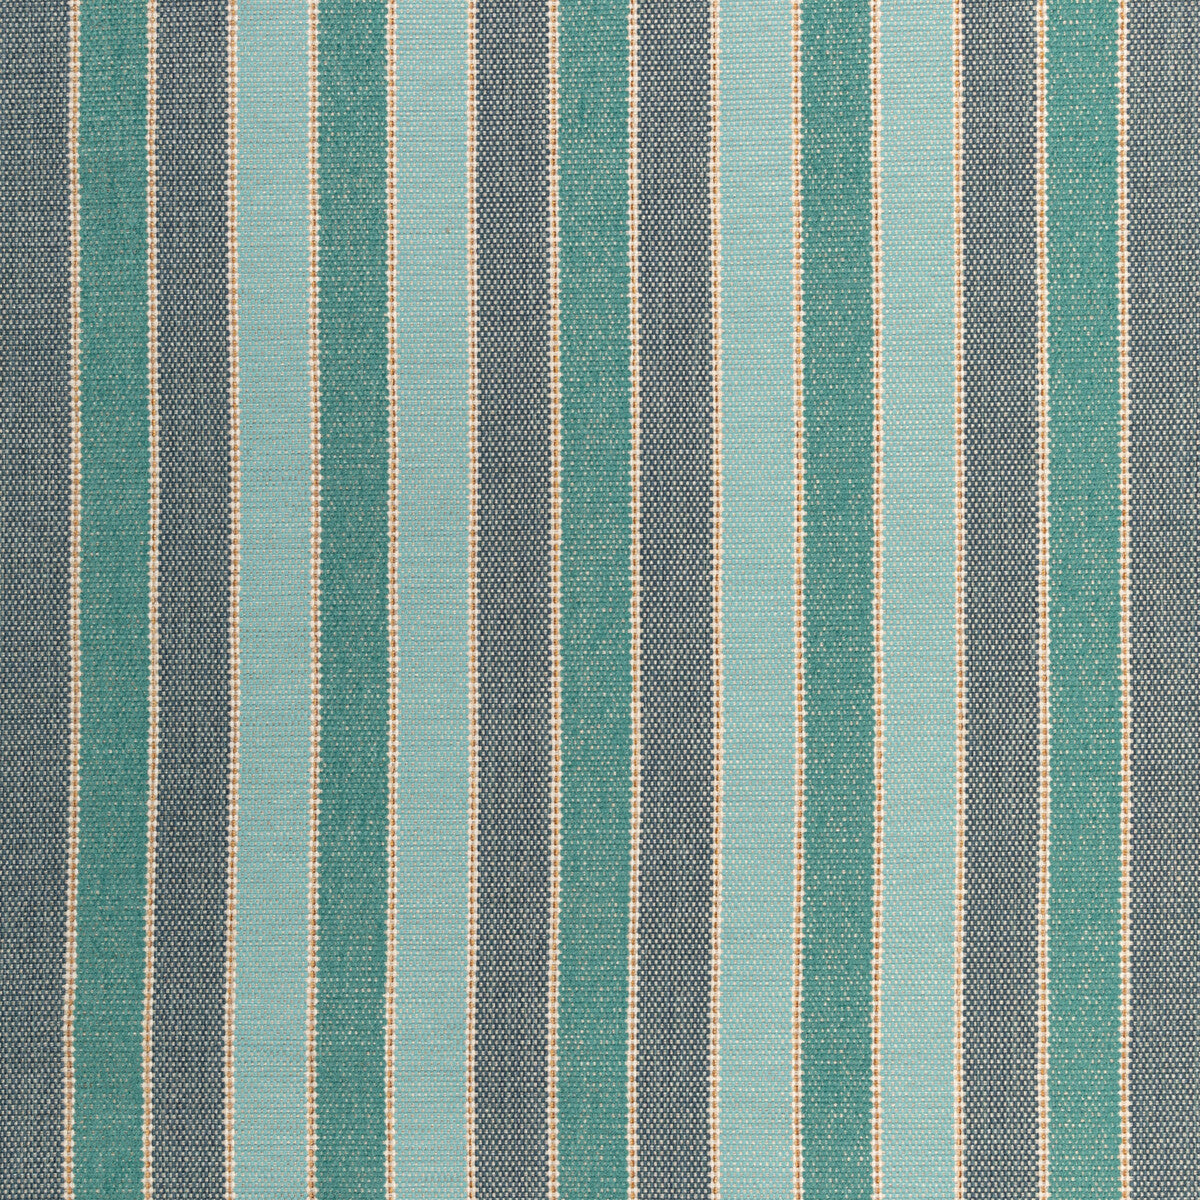 Walkway fabric in oasis color - pattern 36278.13.0 - by Kravet Contract in the Gis Crypton collection